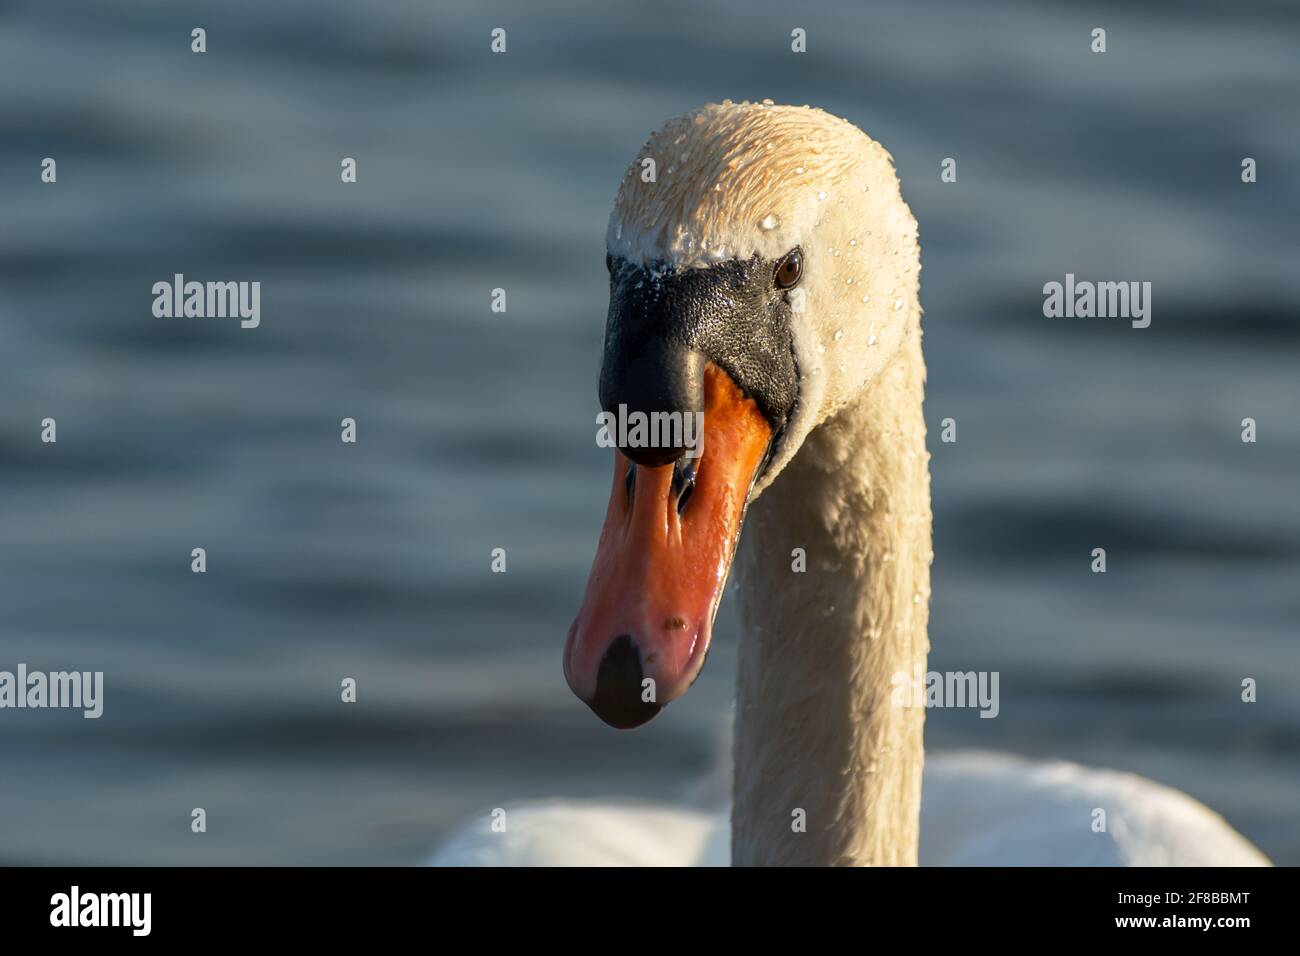 Mute swan's head illuminated by the sun, front view Stock Photo